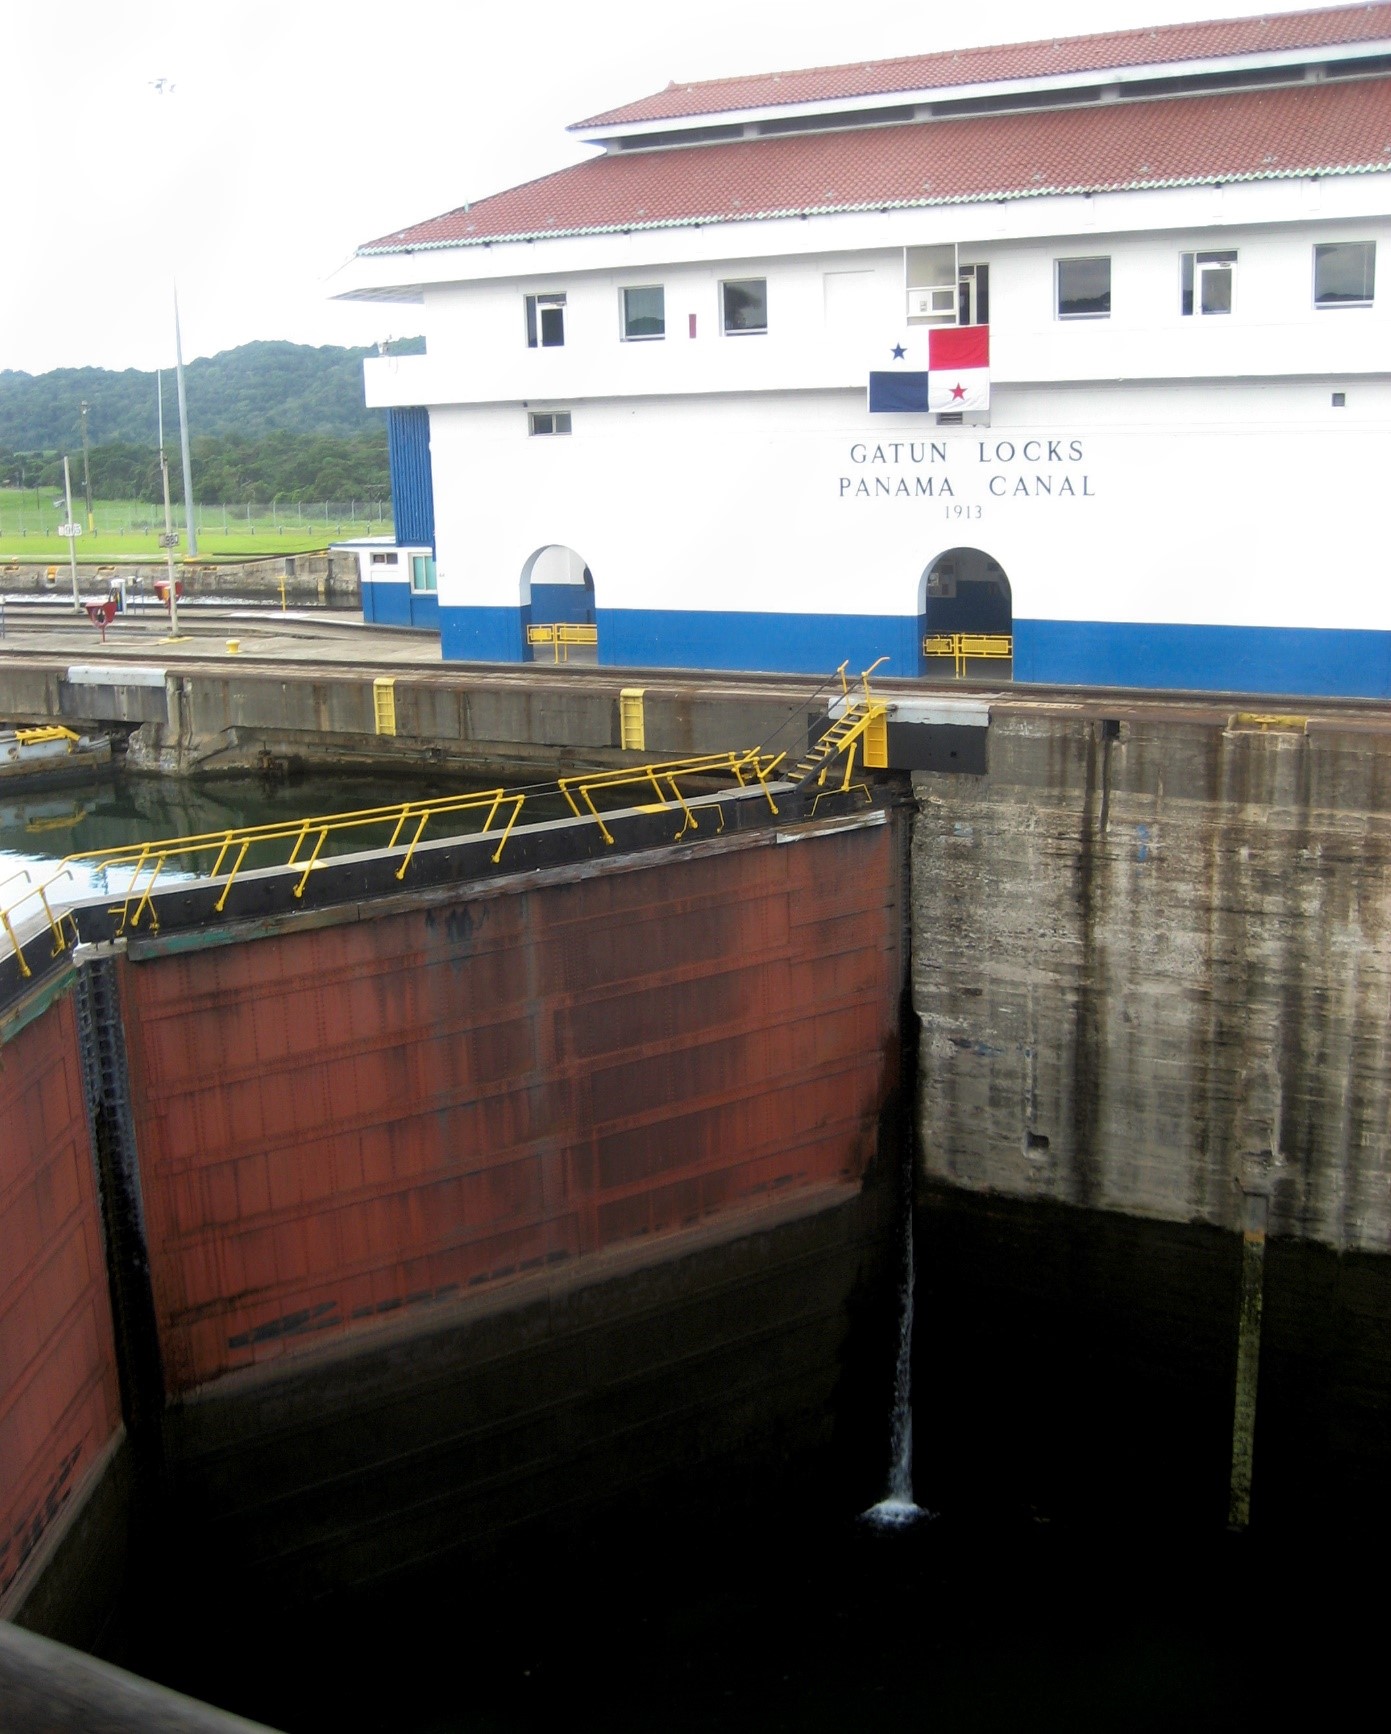 on Google Search for "Panama Canal" and 'Panama Canal locks"